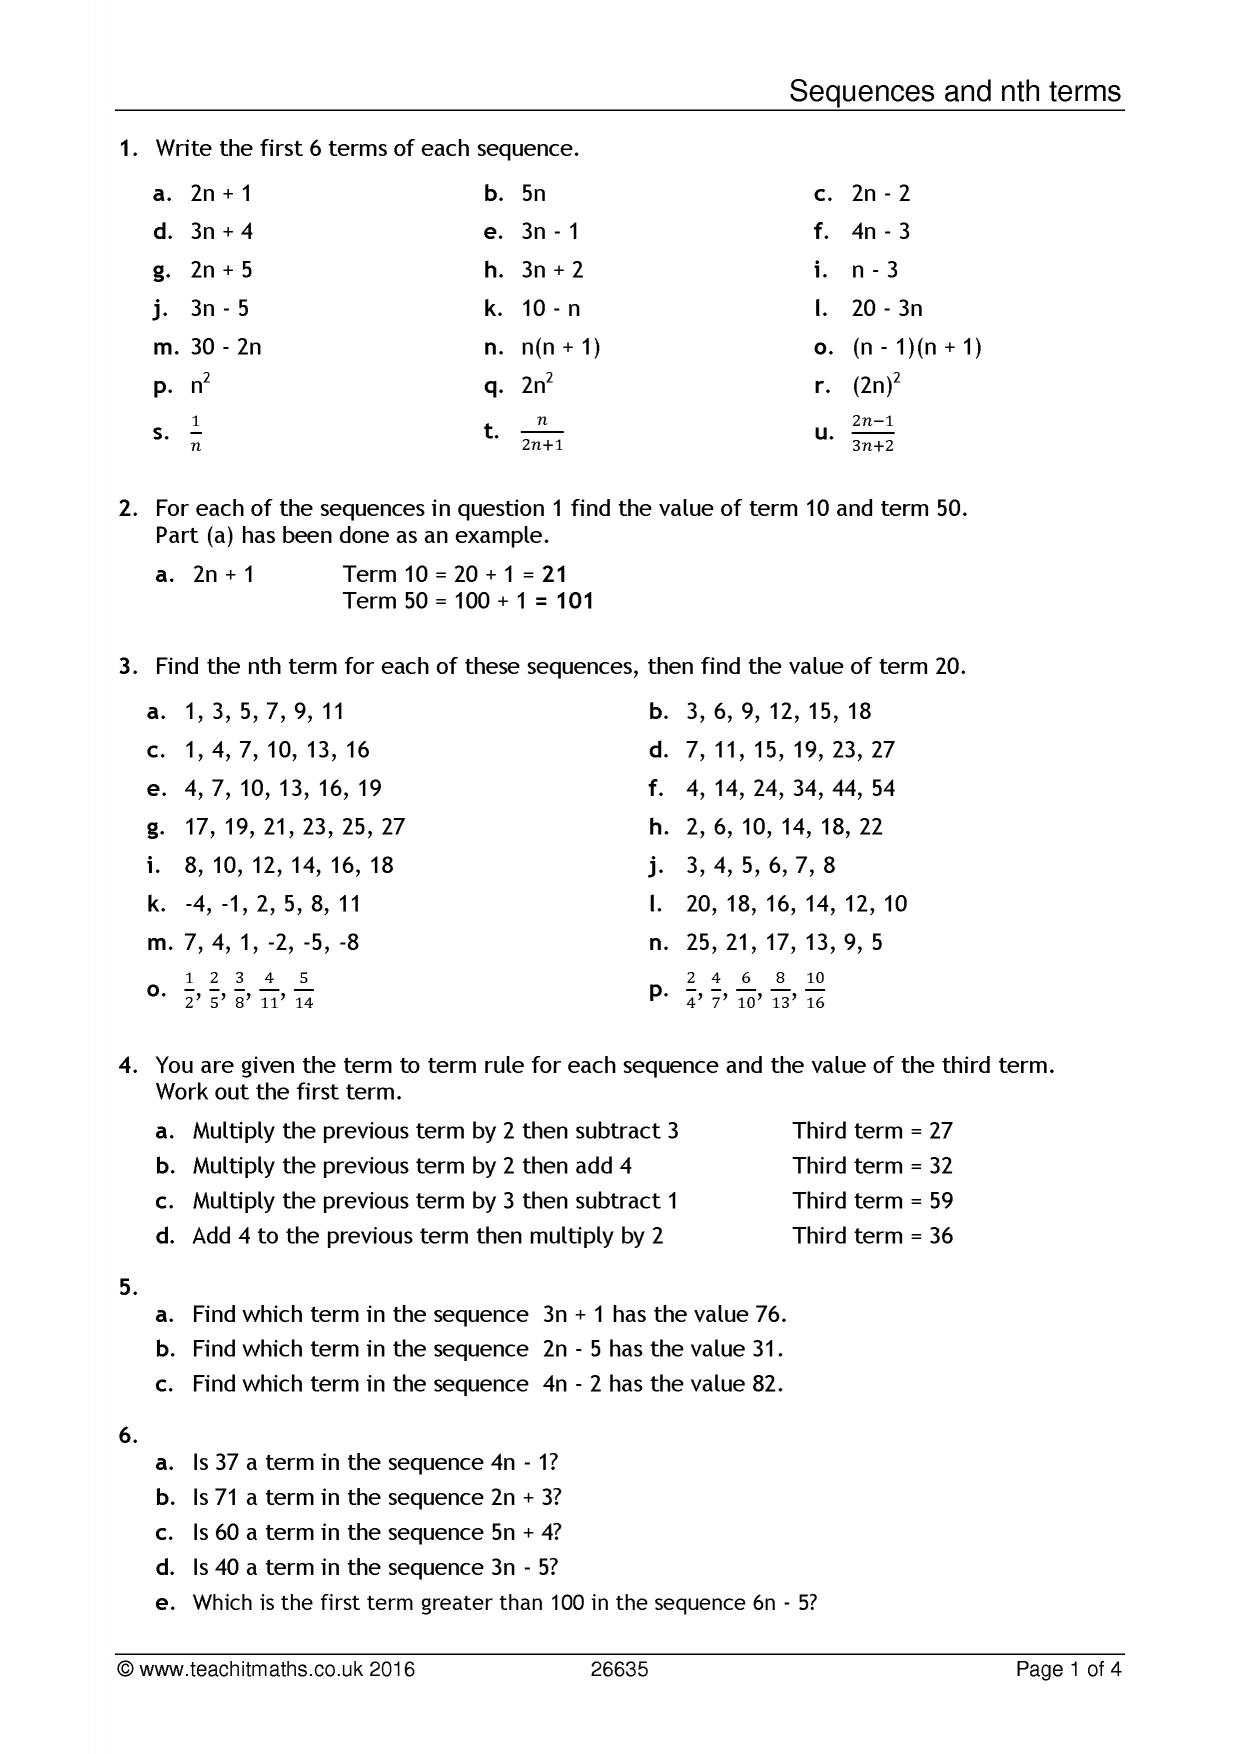 Sequences and nth terms worksheet [PDF] - Teachit Maths For Arithmetic Sequence Worksheet With Answers